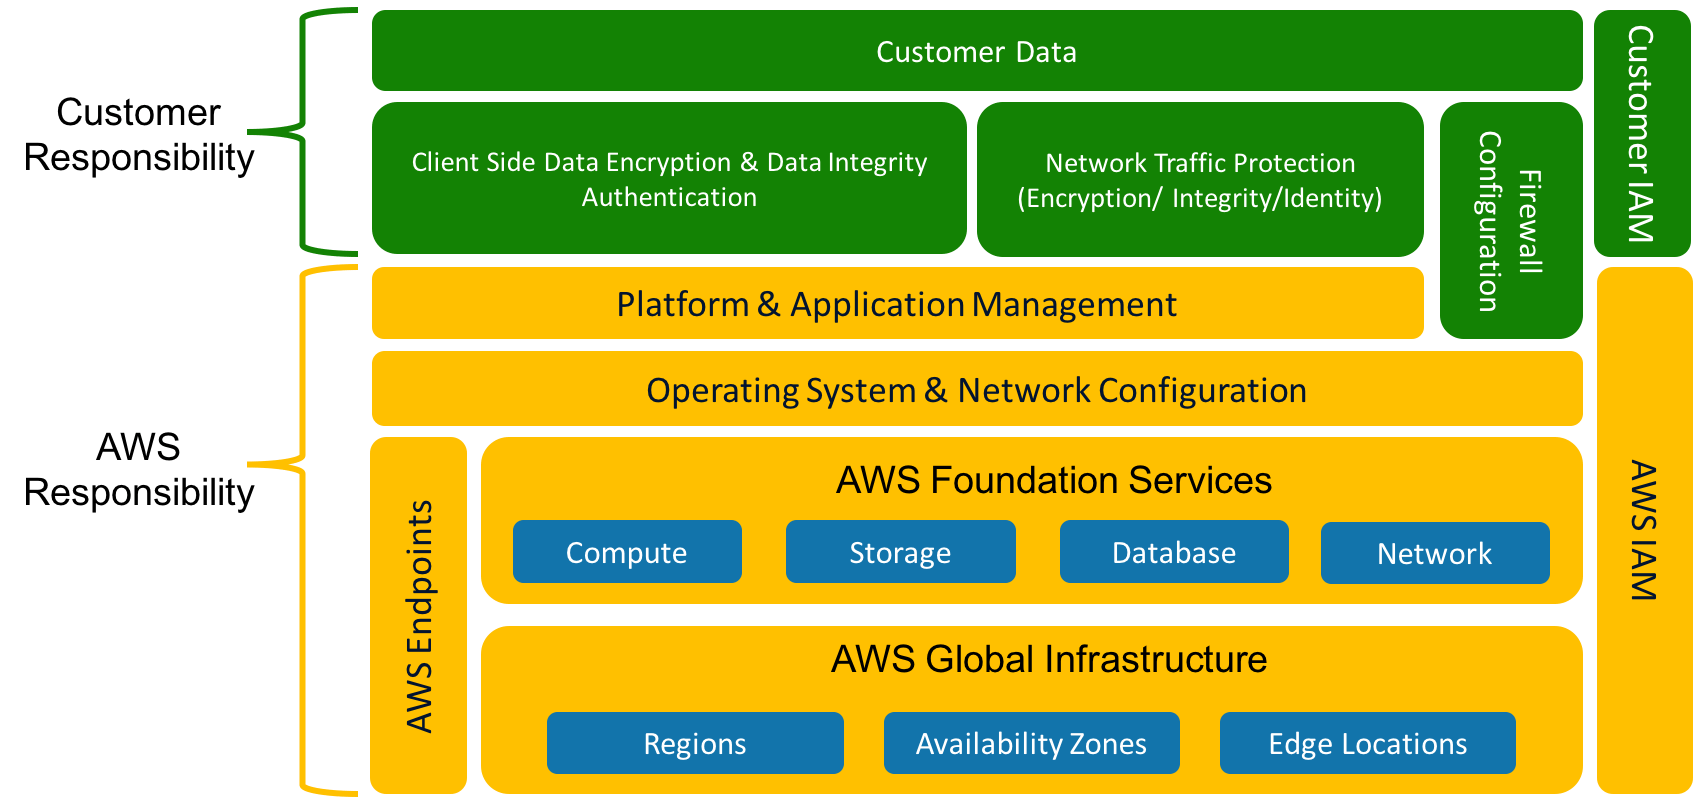 Customer responsibility and AWS responsibility